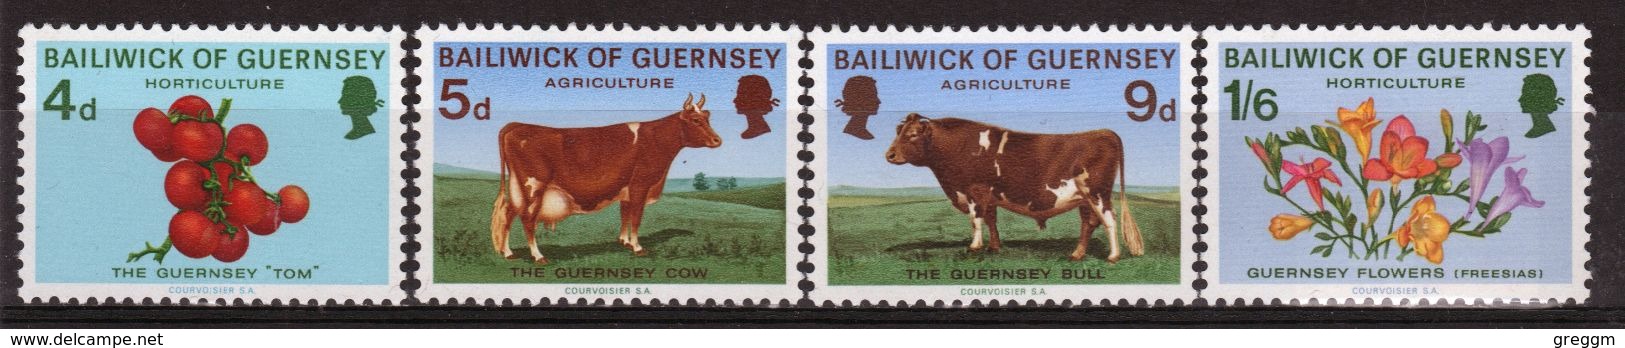 Guernsey 1970 Set Of Stamps To Celebrate Agriculture And Horticulture - Guernsey